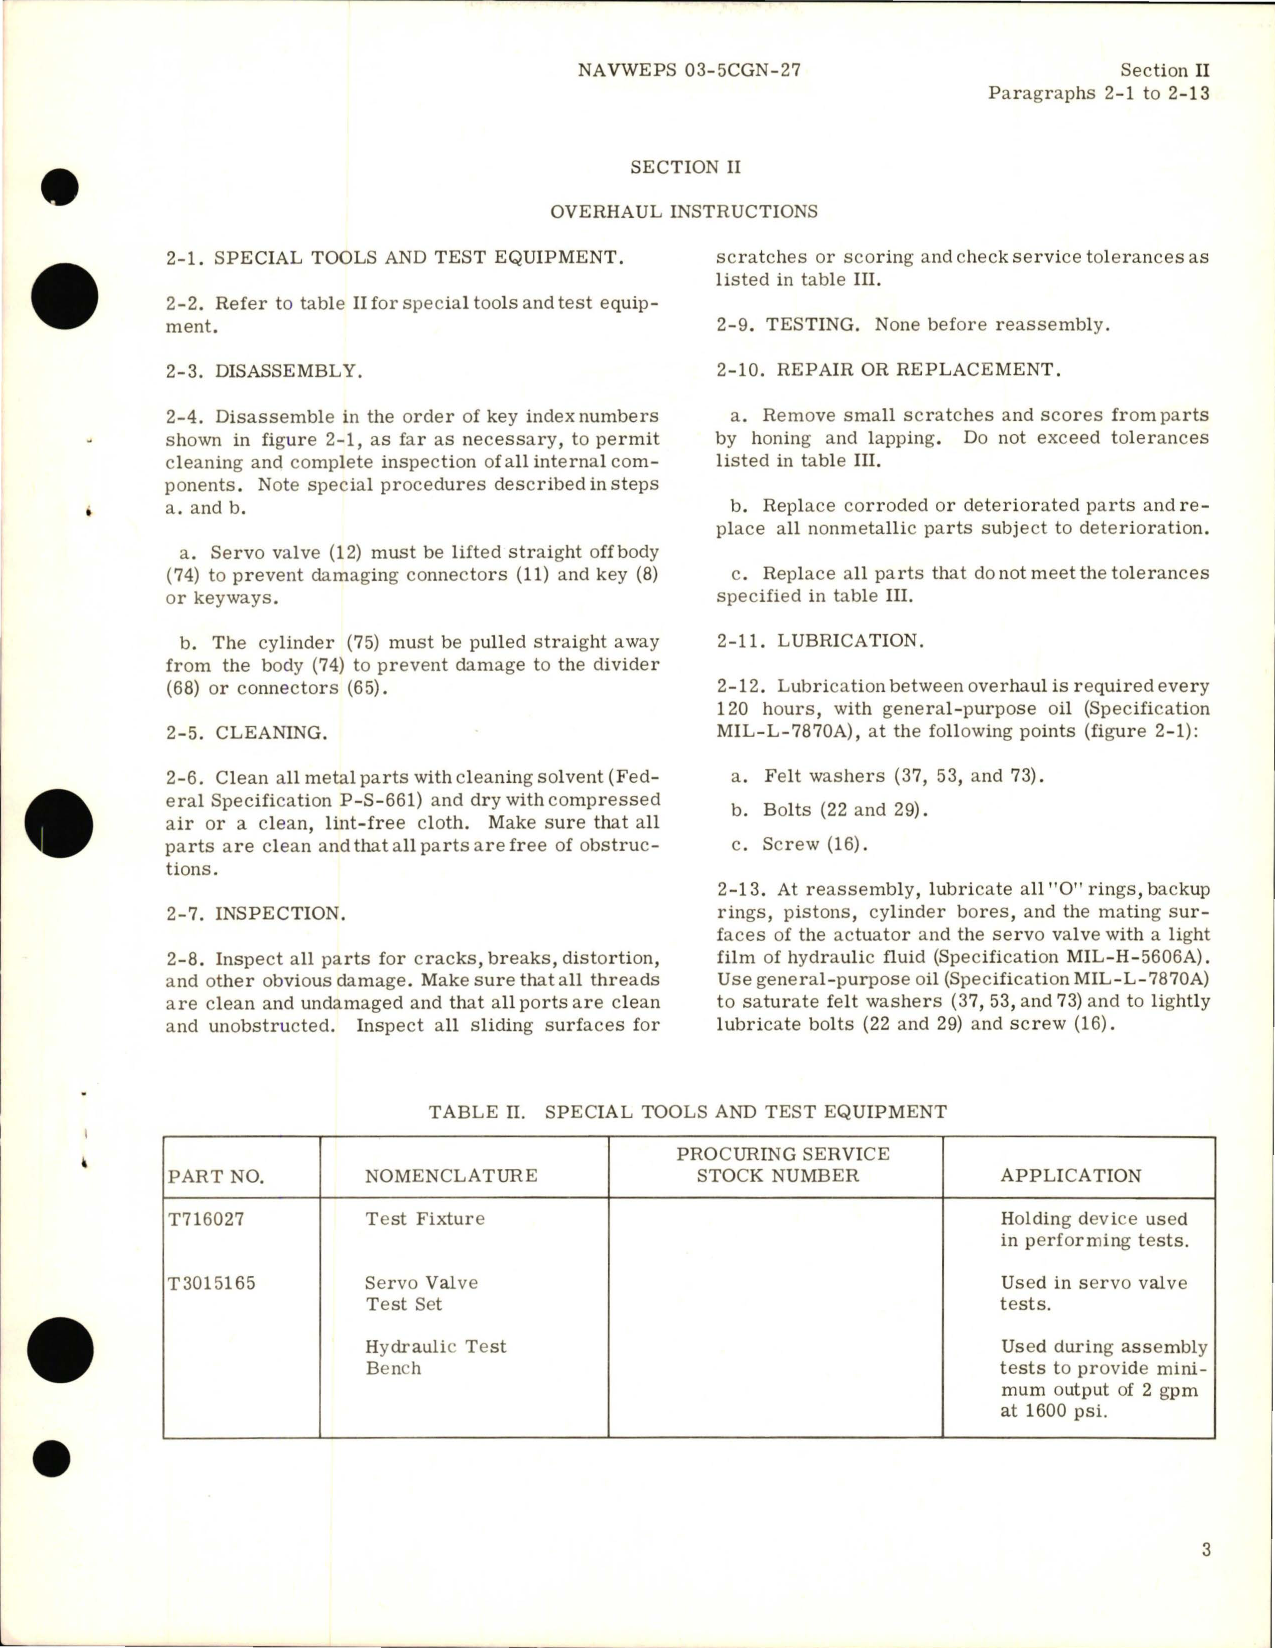 Sample page 5 from AirCorps Library document: Overhaul Instructions for Hydraulic Flight Control Horizontal and Vertical Stabilizer Master Actuator Assembly - Part 247-58717-31